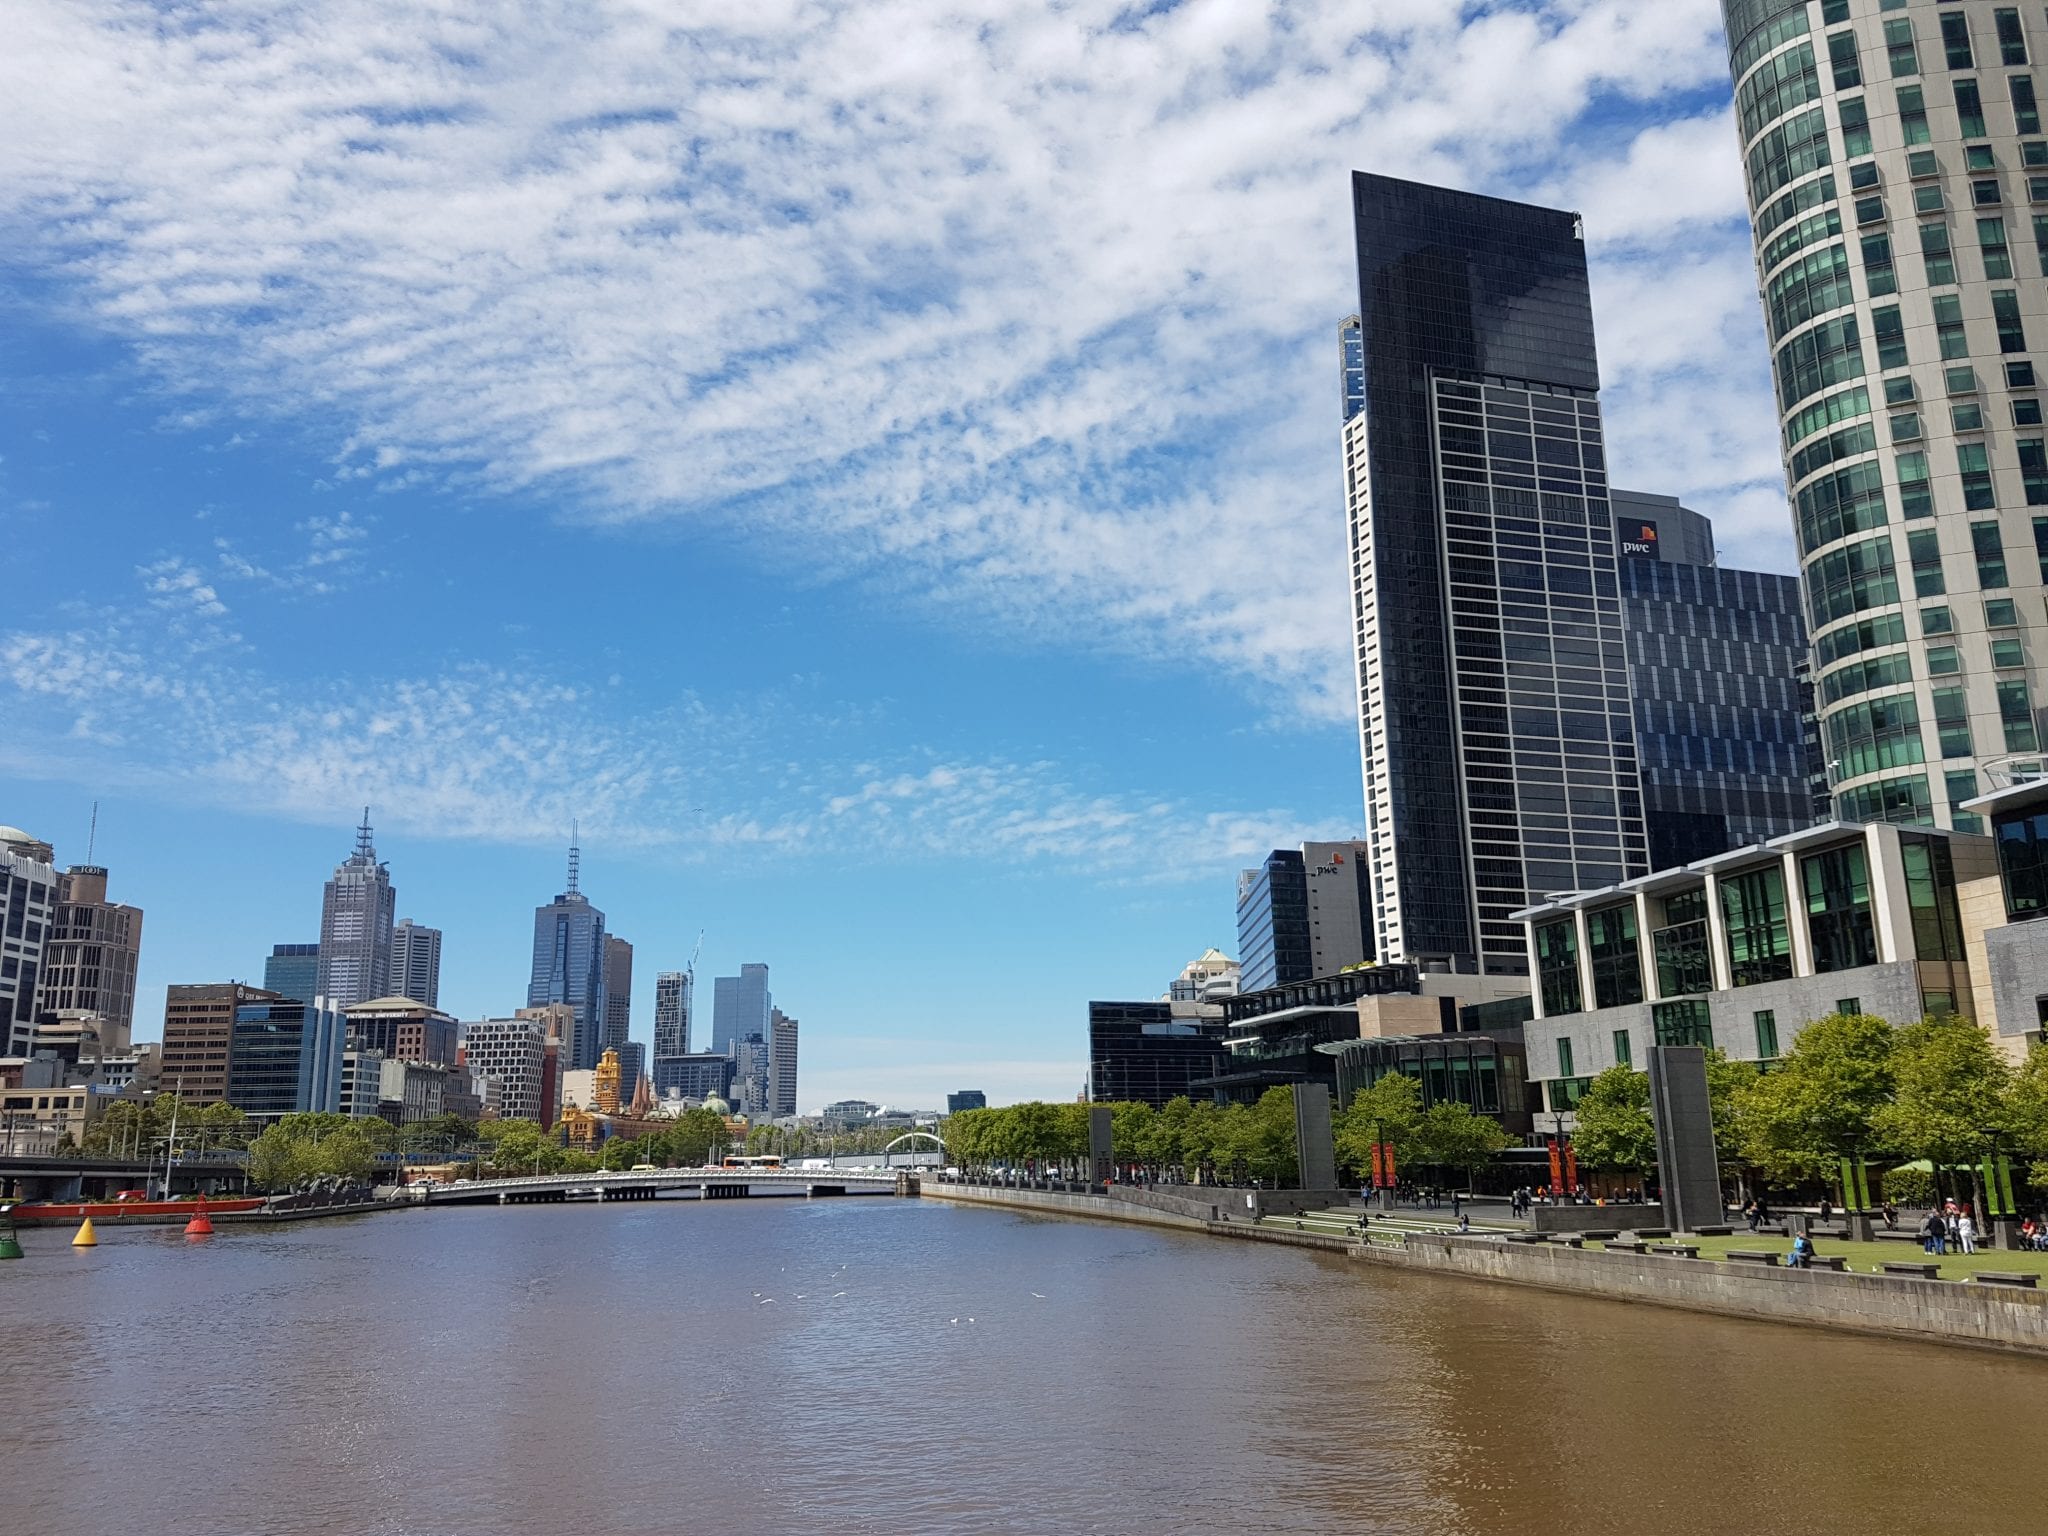 sights Melbourne 7 - CITY GUIDE - Sights and food in Melbourne